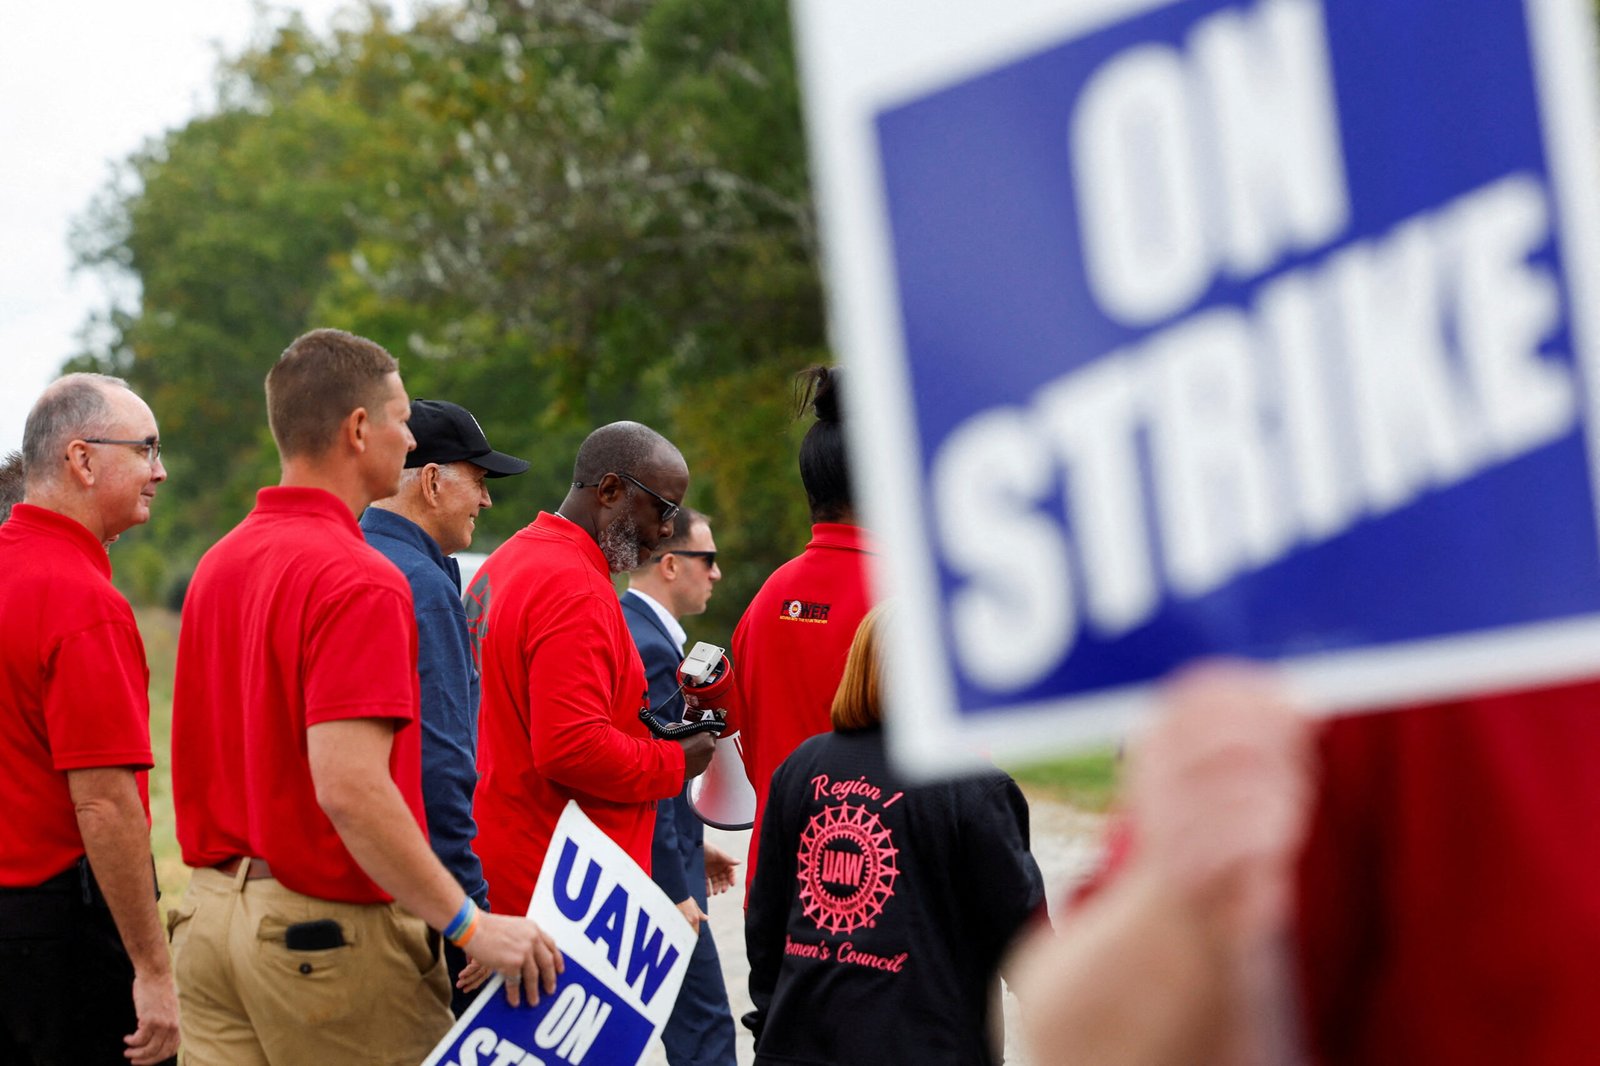 uaw-workers-and-mack-trucks-reach-deal-to-avoid-strike